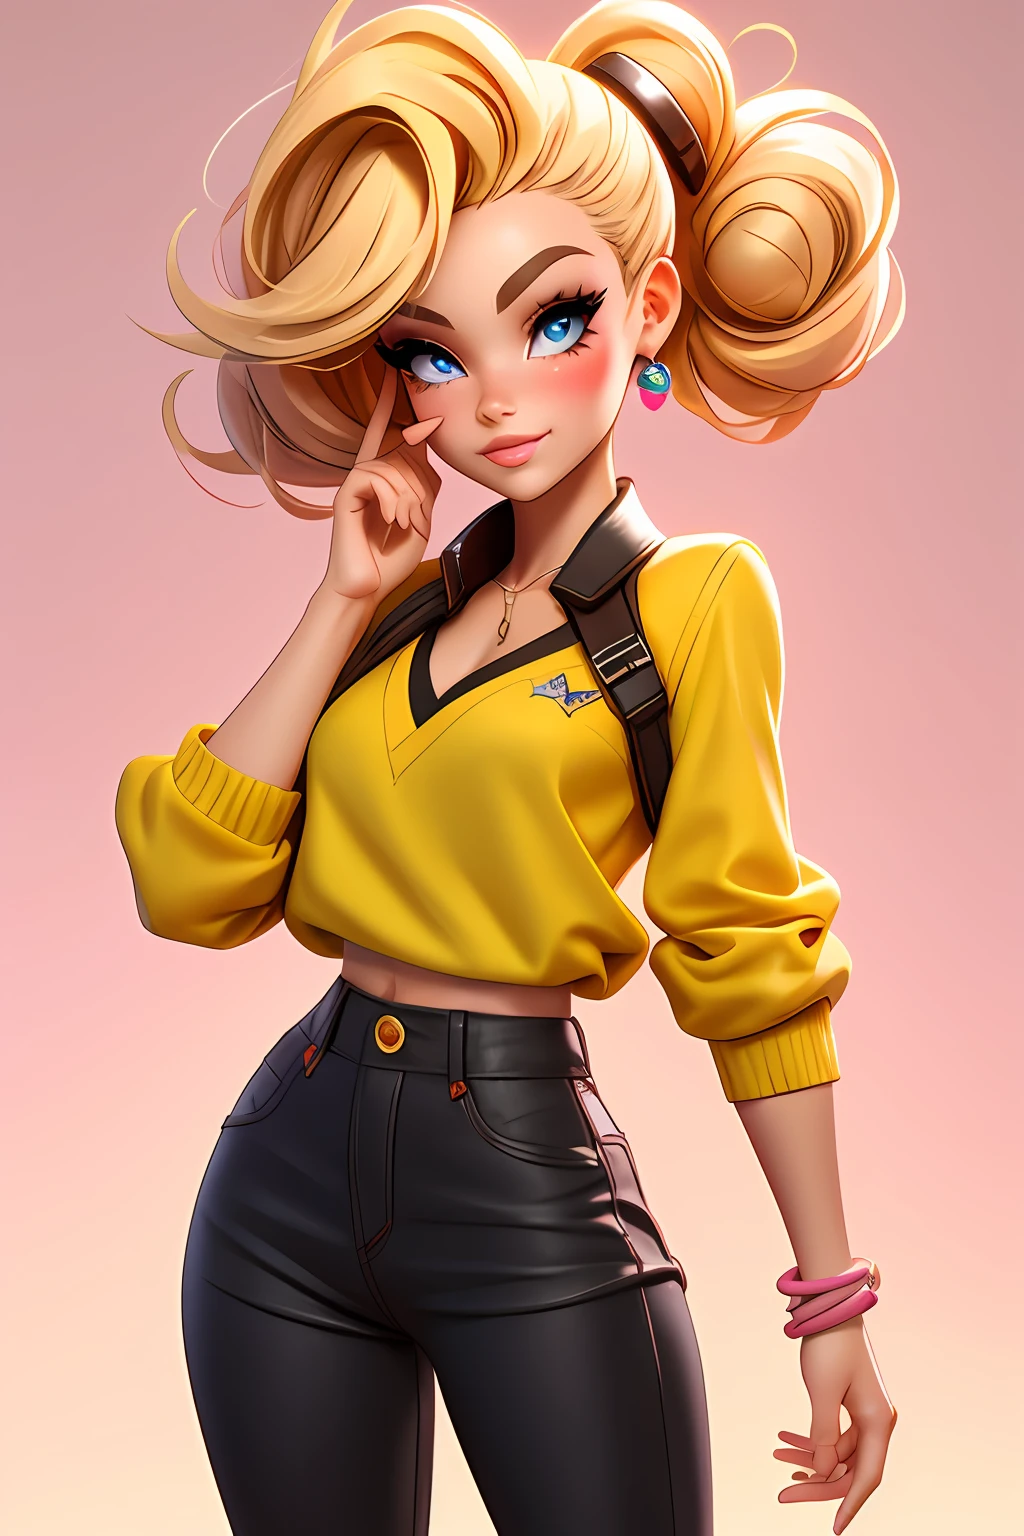 3DCHARACTER, 1 , adult  woman, freckles, hazelnut eyes, Frohawk blond, Jammers, (fully body: 1.2), simple background, Masterpiece artwork, best qualityer, (gradient background) Happy blonde hair, pastel hues, Barbie fashion style, artistation